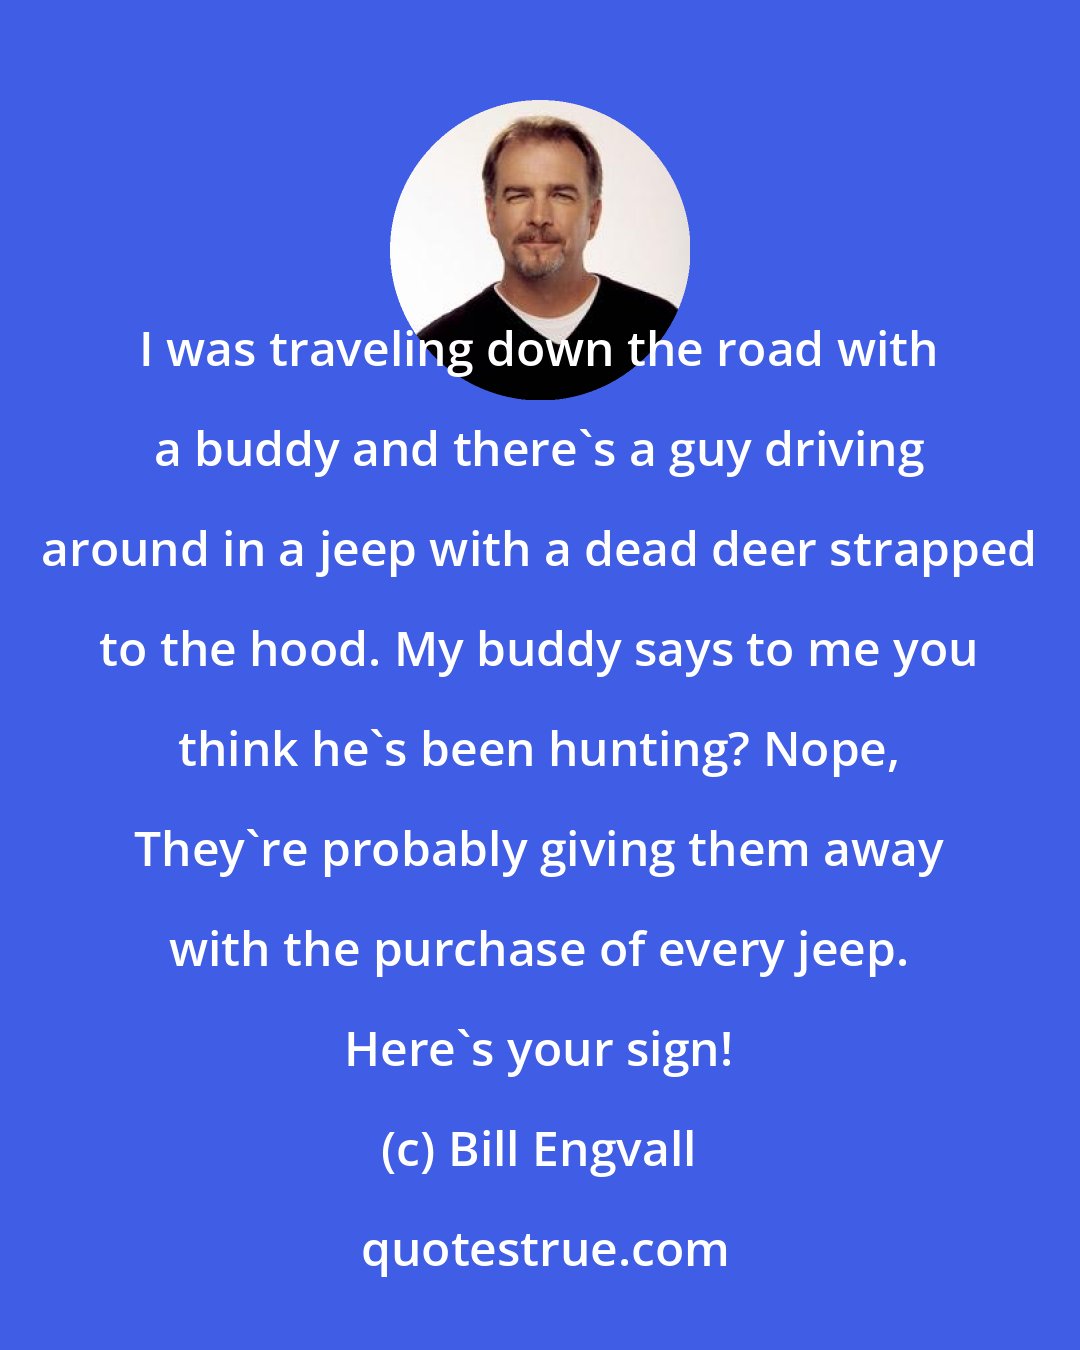 Bill Engvall: I was traveling down the road with a buddy and there's a guy driving around in a jeep with a dead deer strapped to the hood. My buddy says to me you think he's been hunting? Nope, They're probably giving them away with the purchase of every jeep. Here's your sign!